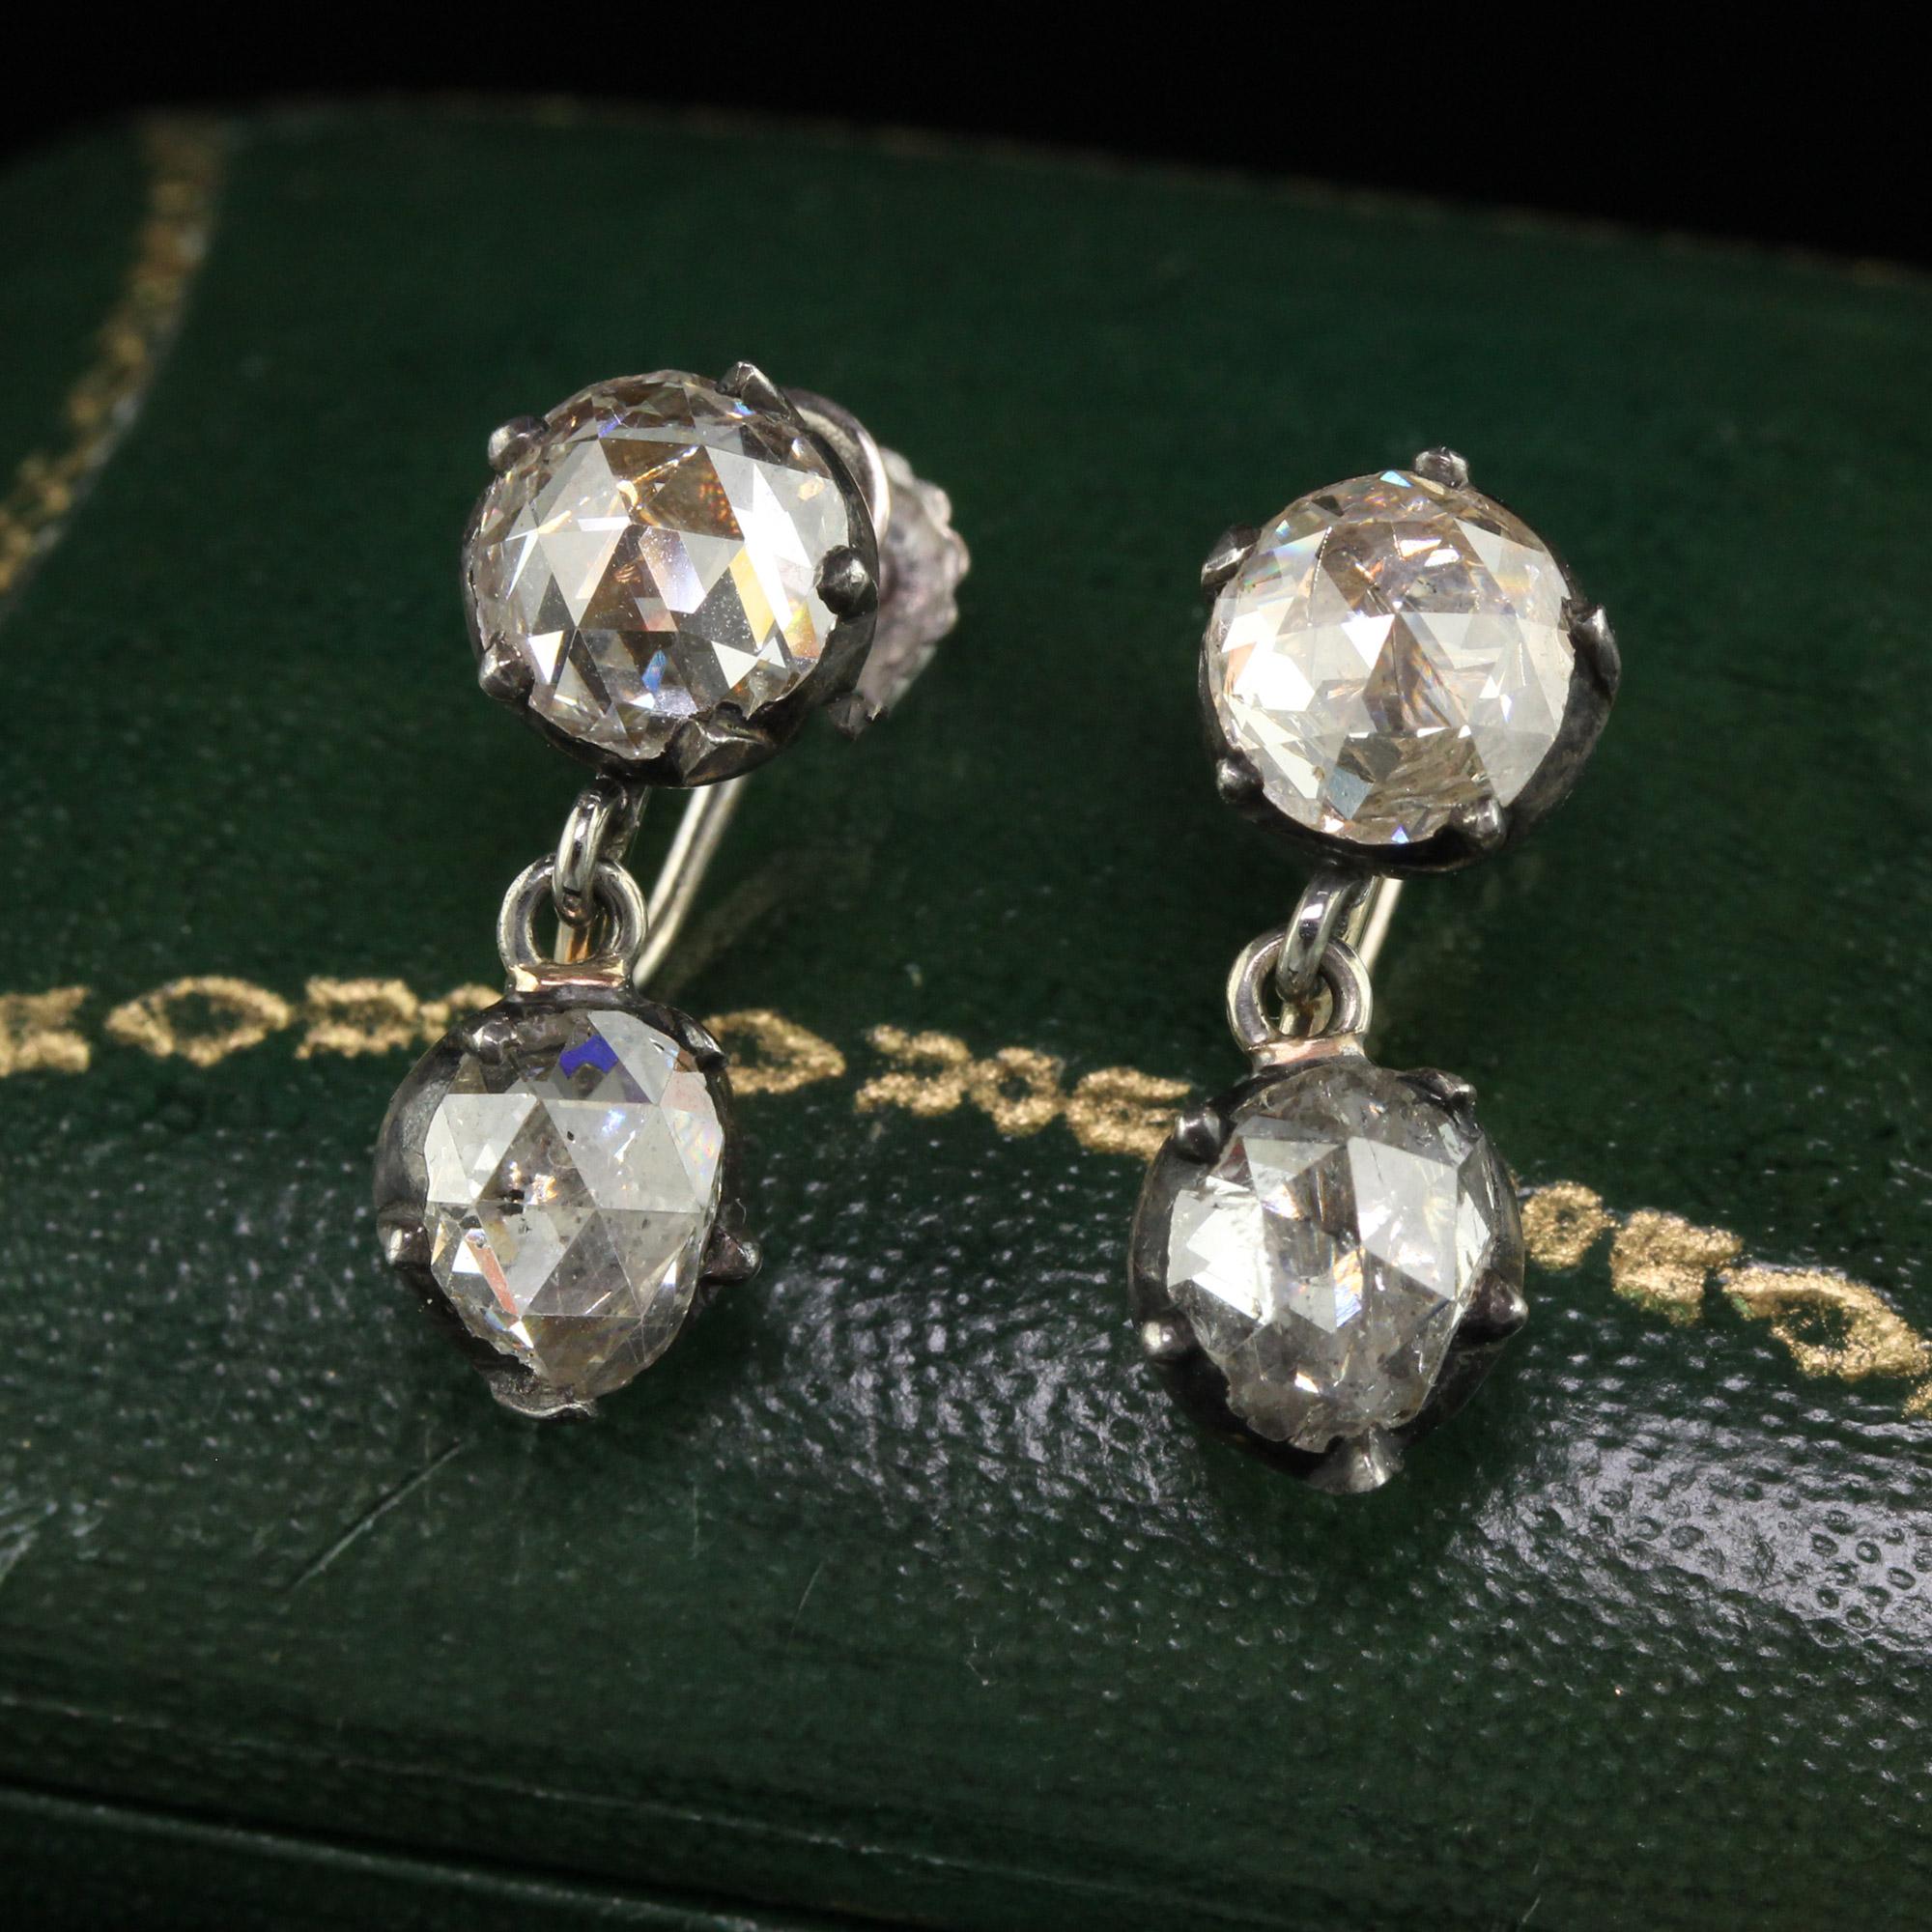 Beautiful Antique Georgian 14K White Gold Silver Rose Cut Diamond Drop Dangling Earrings. This gorgeous pair of Georgian diamond earrings are crafted in silver and 14k white gold. These drop earrings have chunky old rose cut diamonds on top and